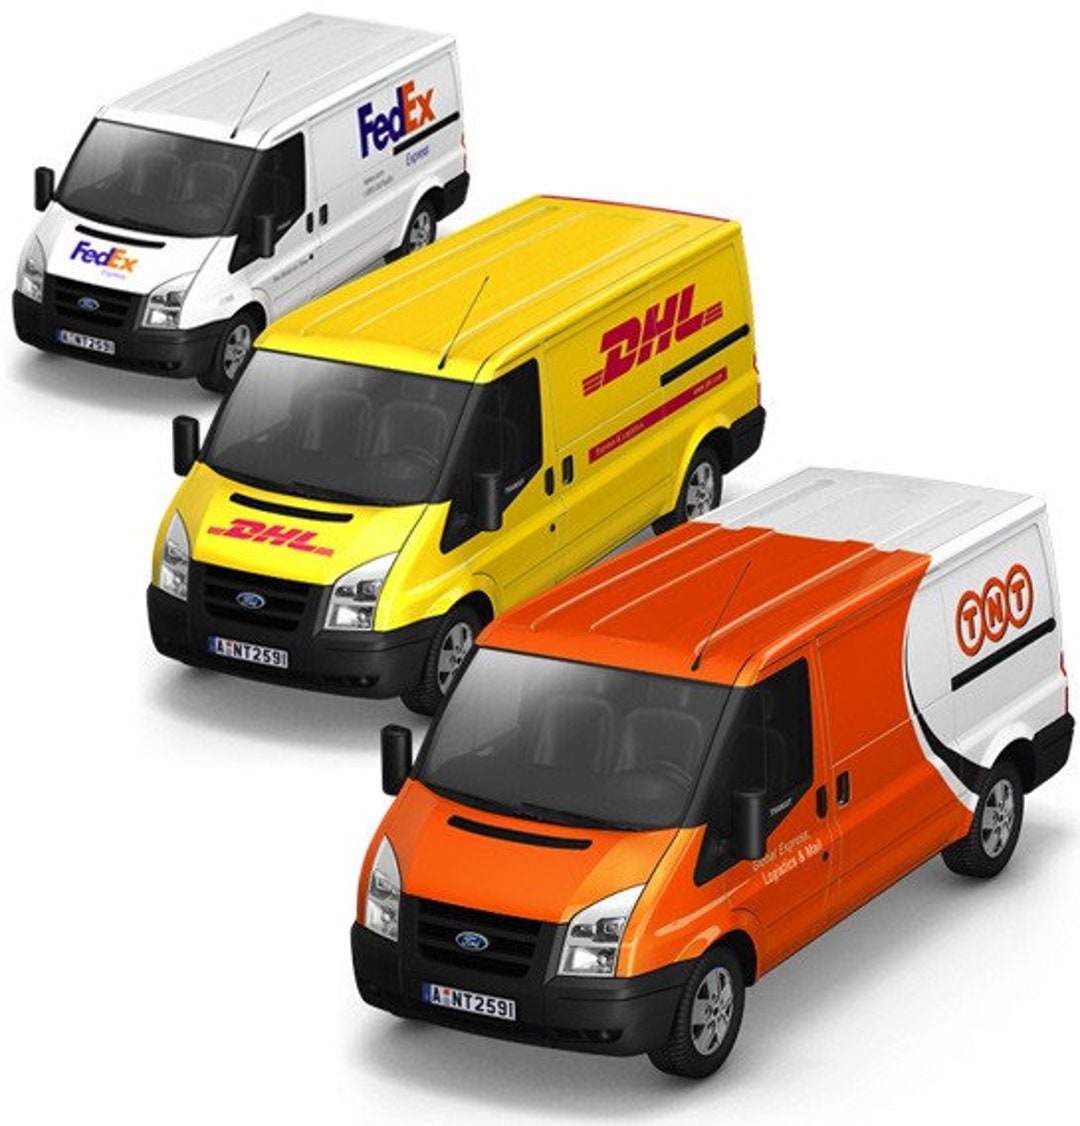 TNT UPS DHL Fedex Express Mail Service Express Shipping - Etsy